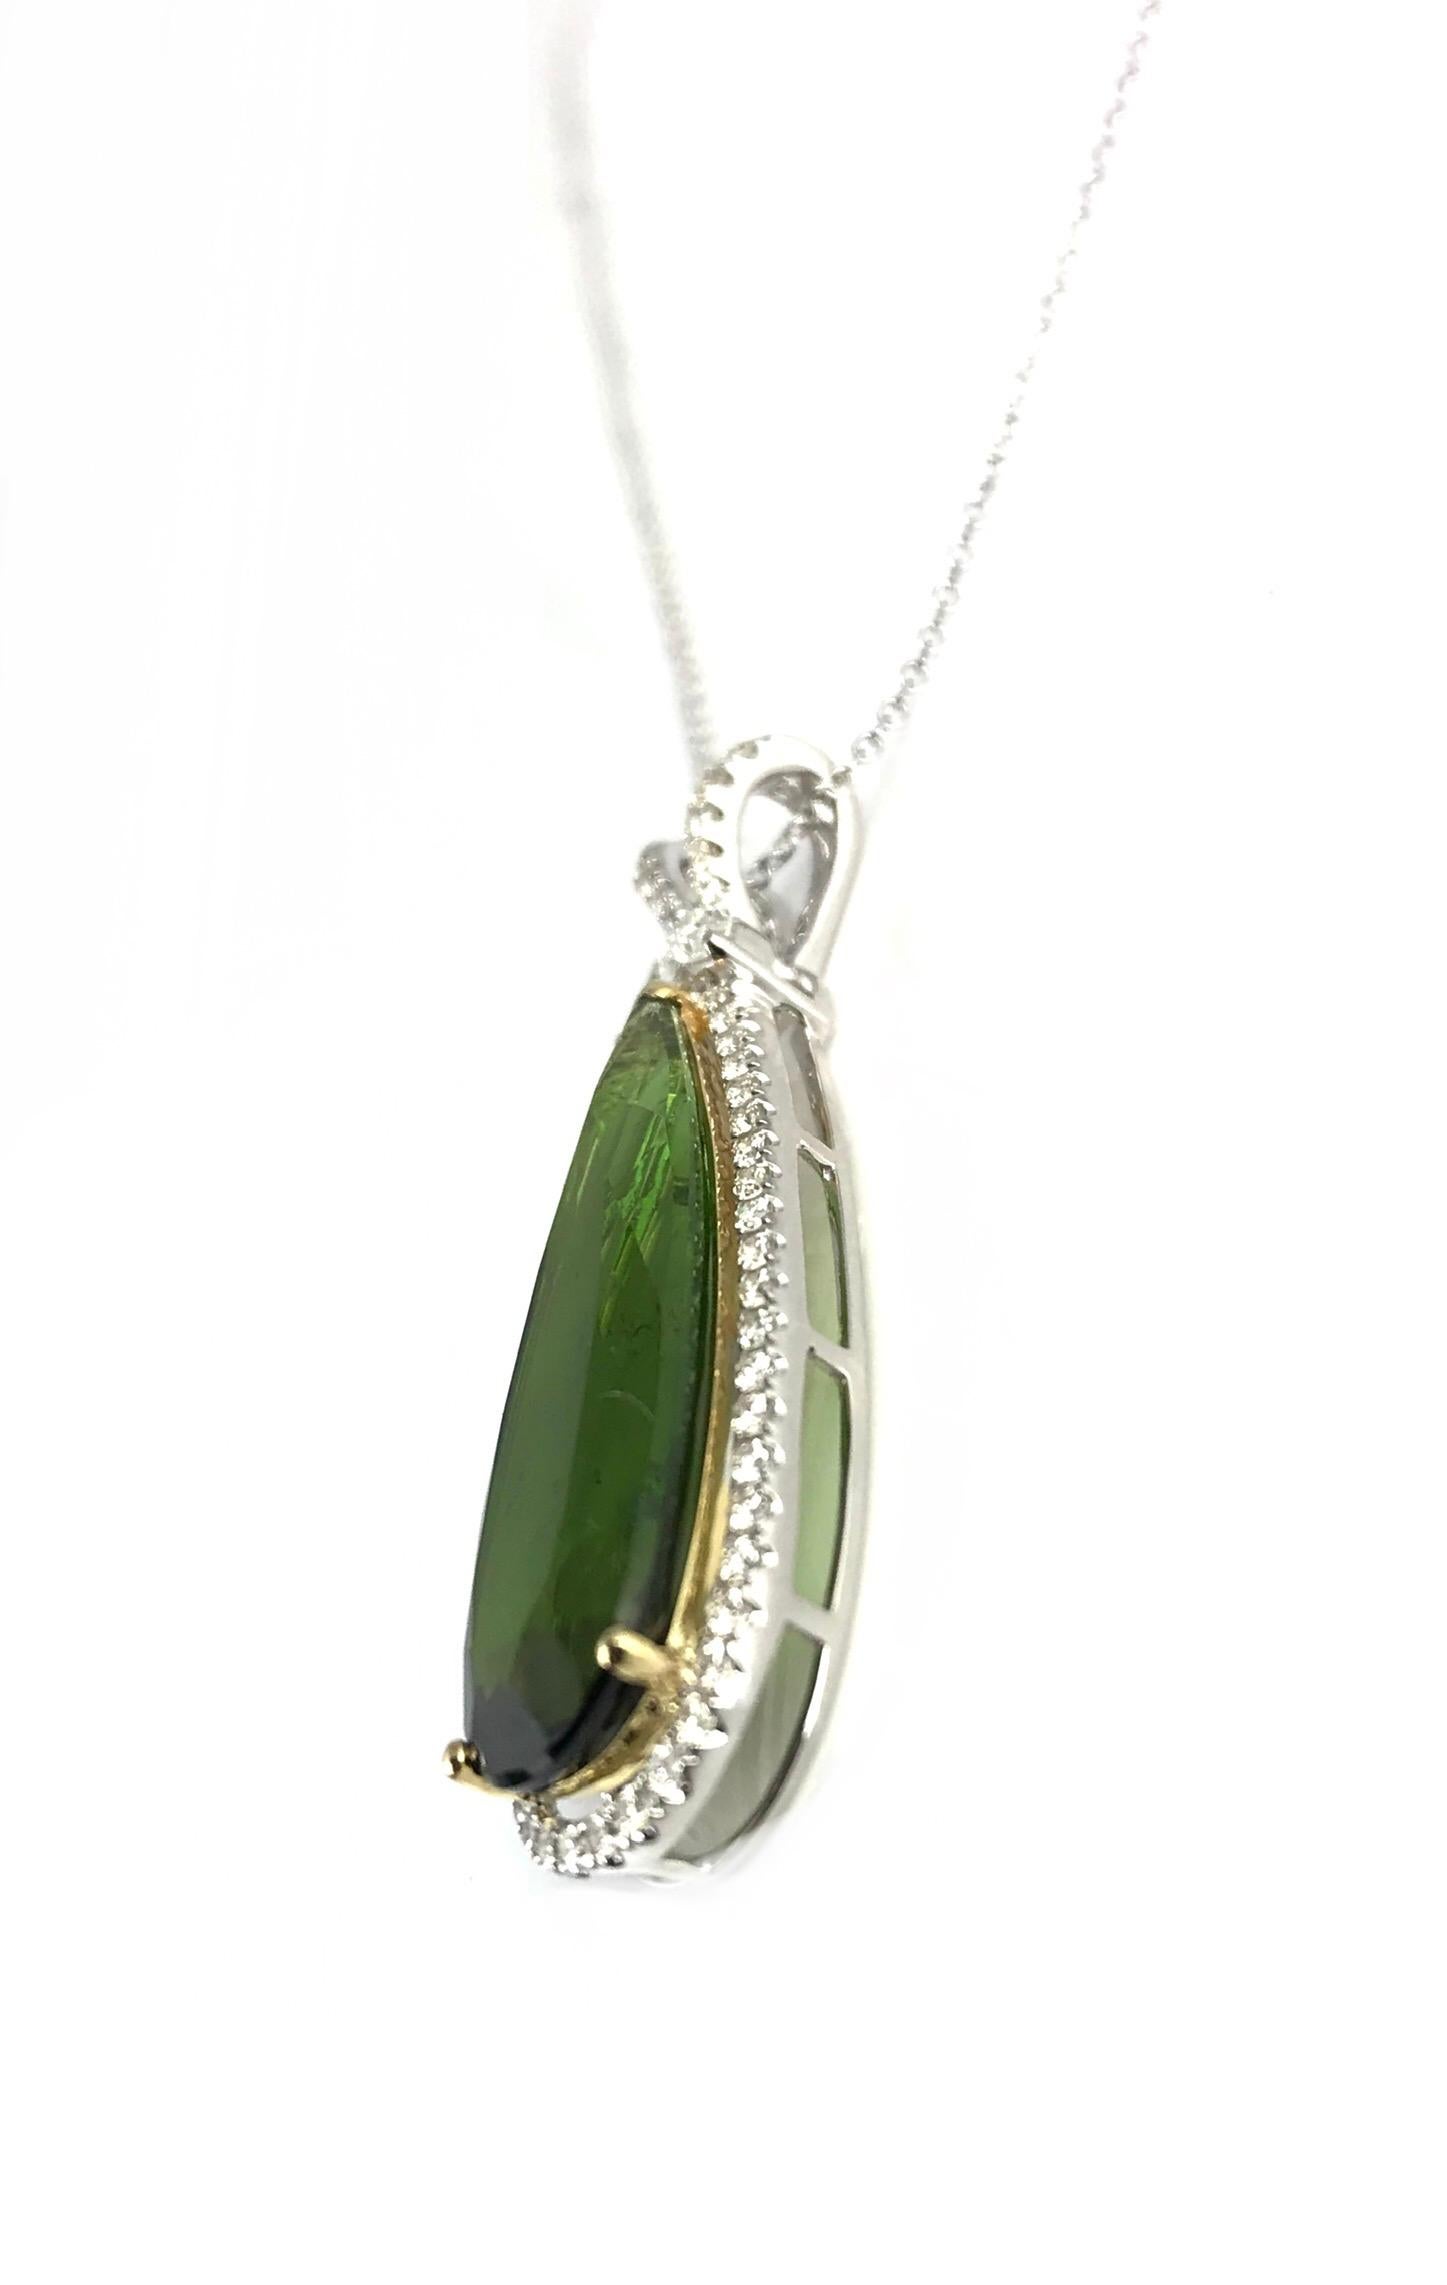 This unique pendant features an 8.44 carat extended pear shape kiwi green tourmaline, set in 18k white gold, with accents of 18k yellow gold at the prongs and in the delicate under gallery. A frame of round natural diamonds surrounds the center